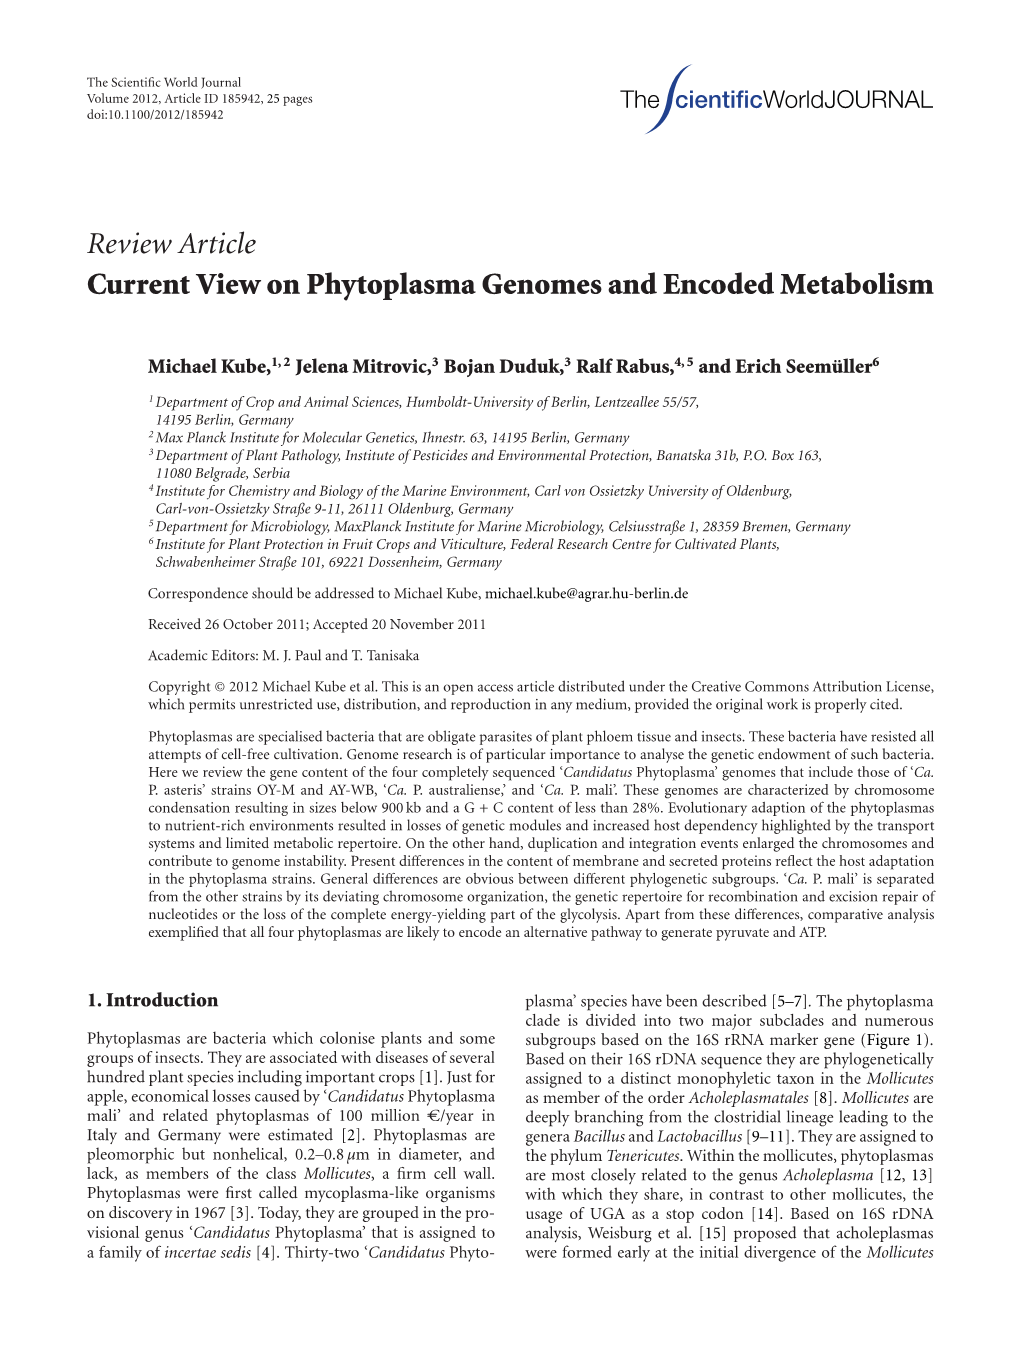 Review Article Current View on Phytoplasma Genomes and Encoded Metabolism